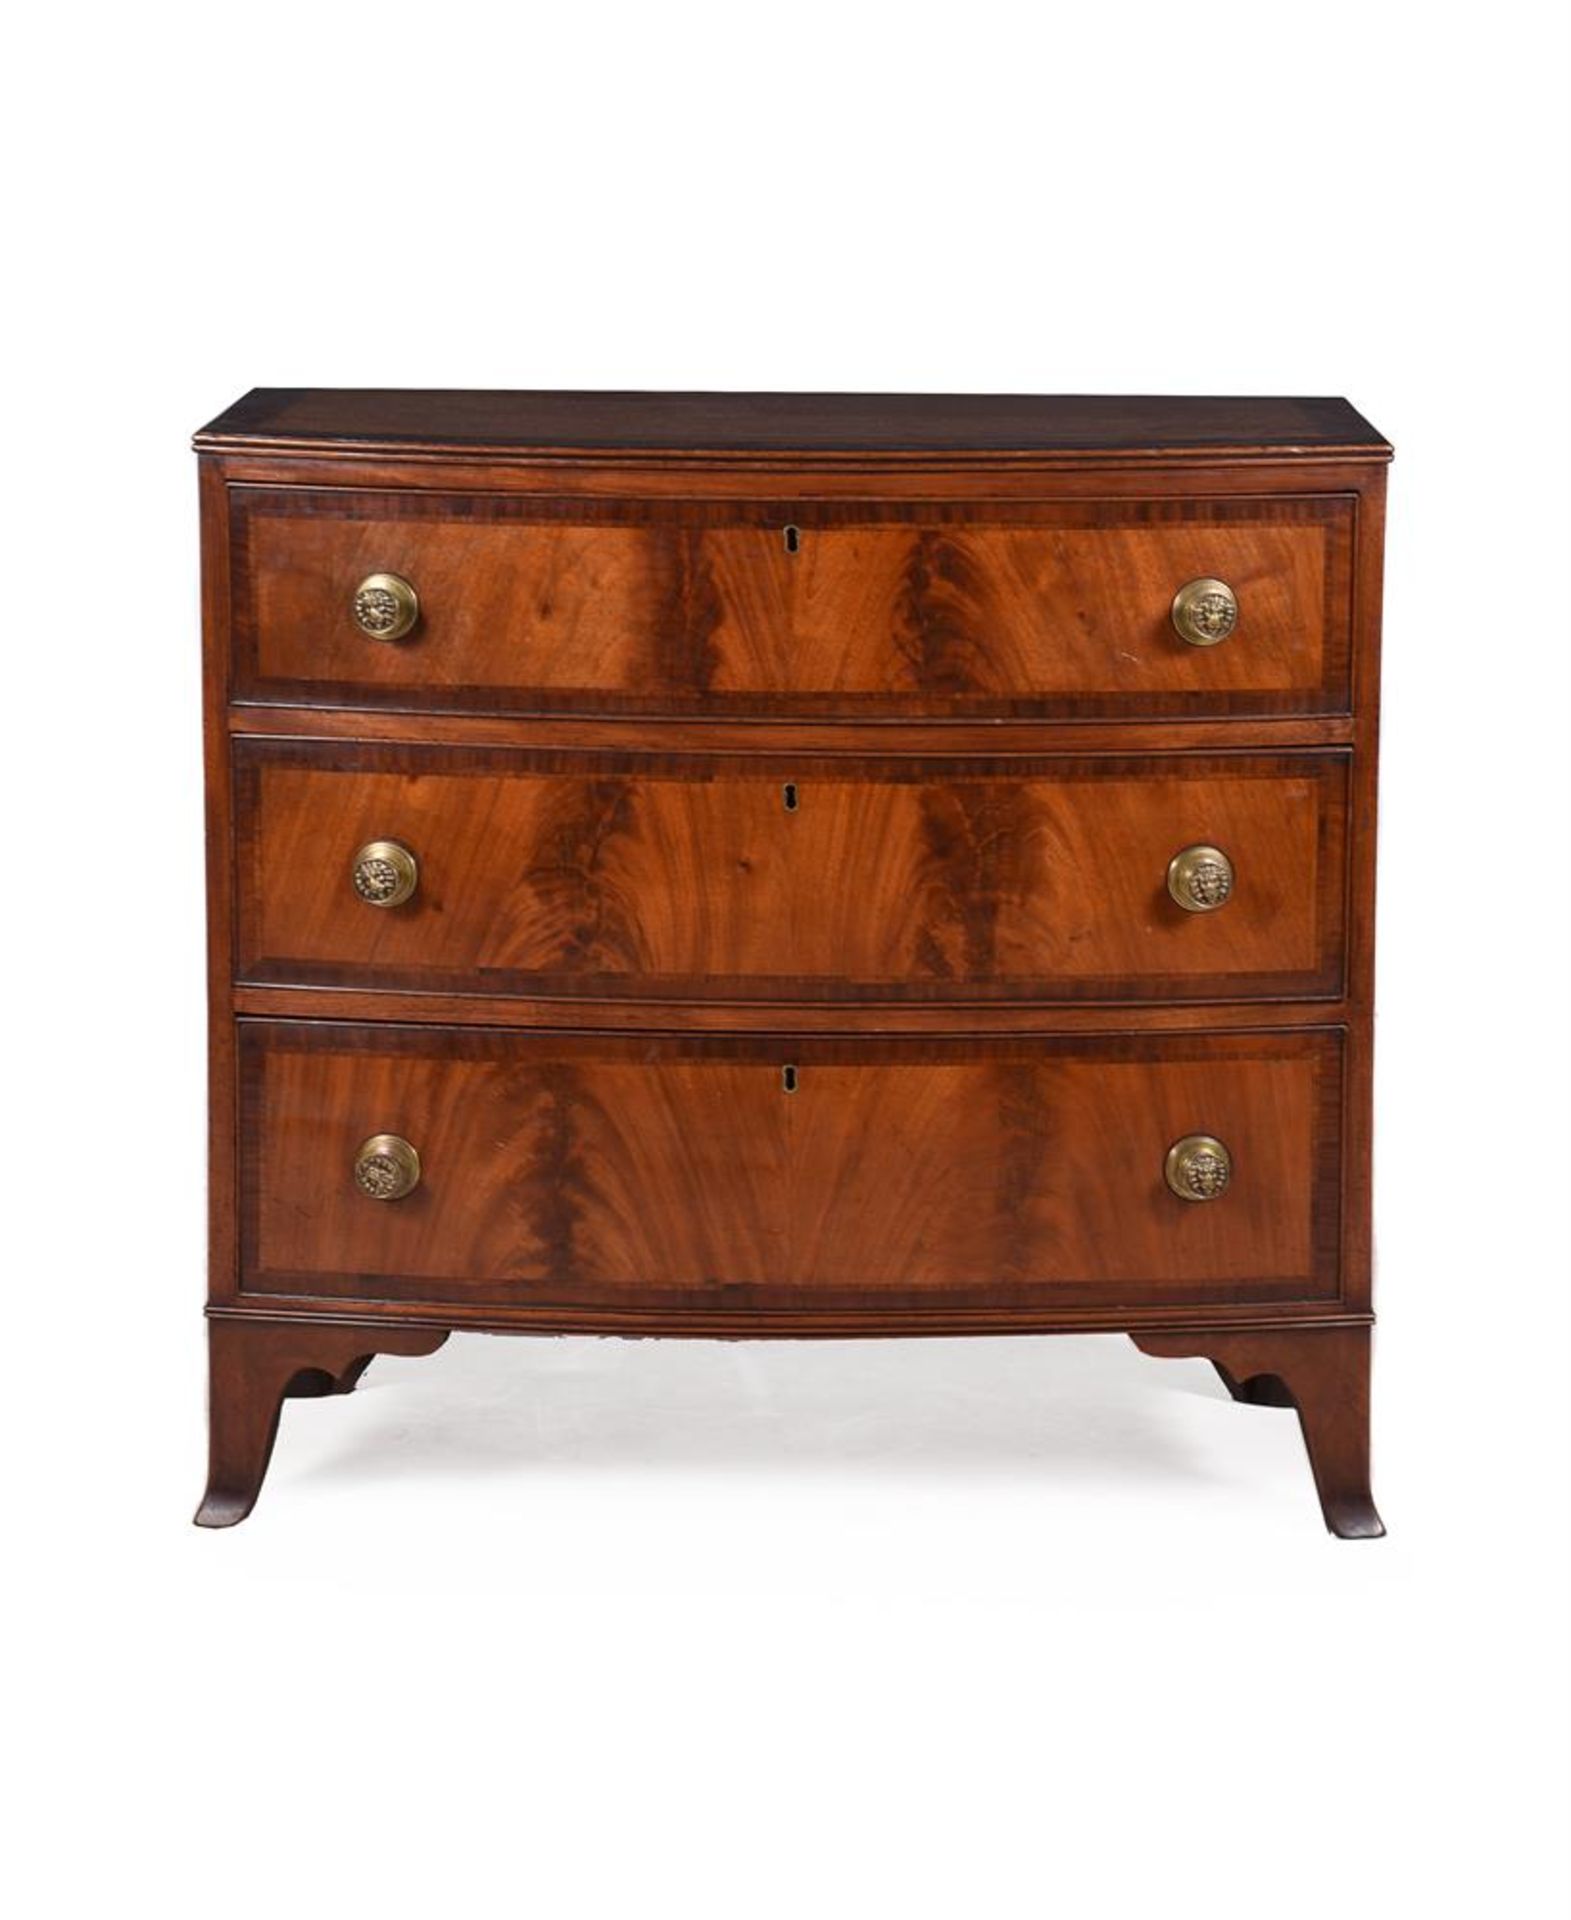 Y A MAHOGANY AND TULIPWOOD BANDED CHEST OF DRAWERS